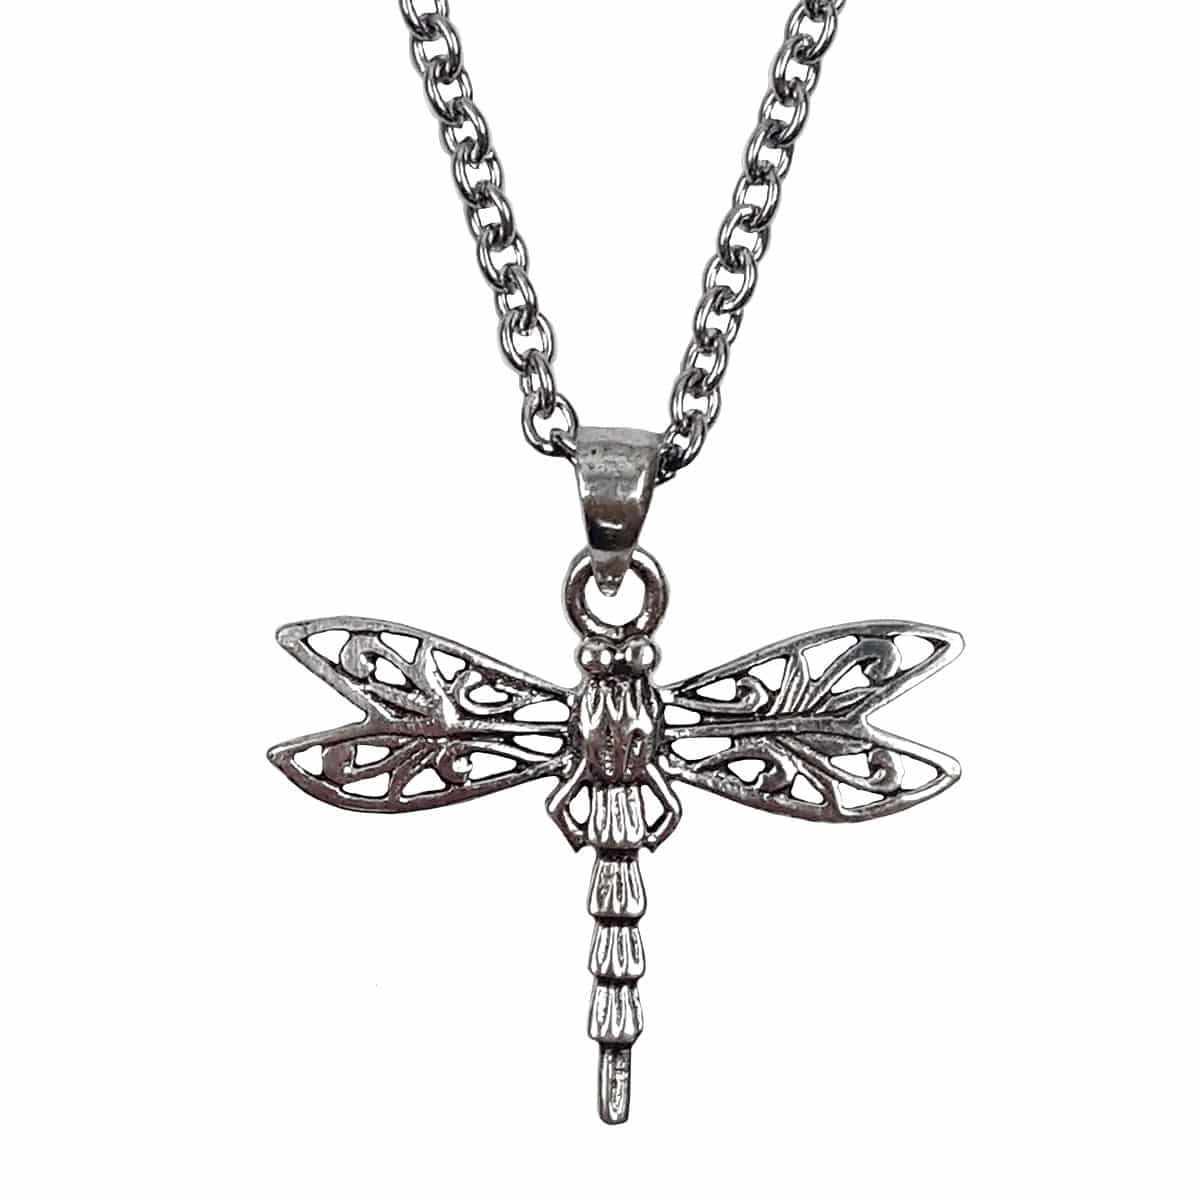 or attached to a purse Dragonfly pendants to be worn as an adornenment with infinity or long scarves Can be key chains gym or tote bag.